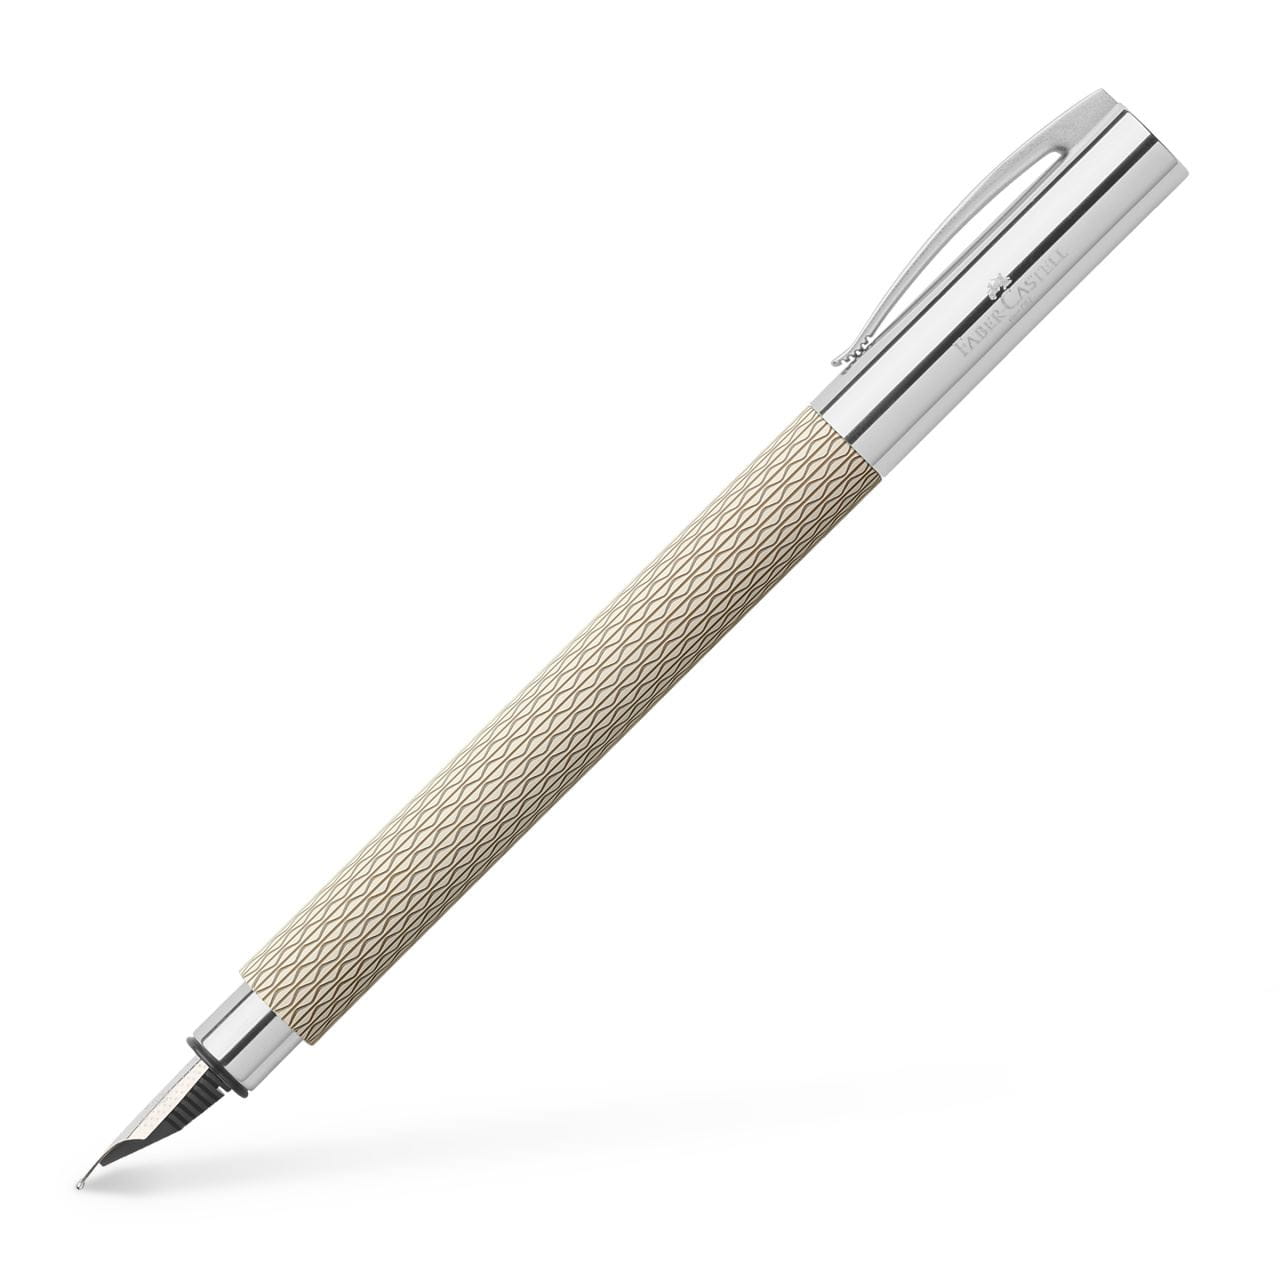 Faber-Castell - Ambition OpArt White Sand fountain pen, F